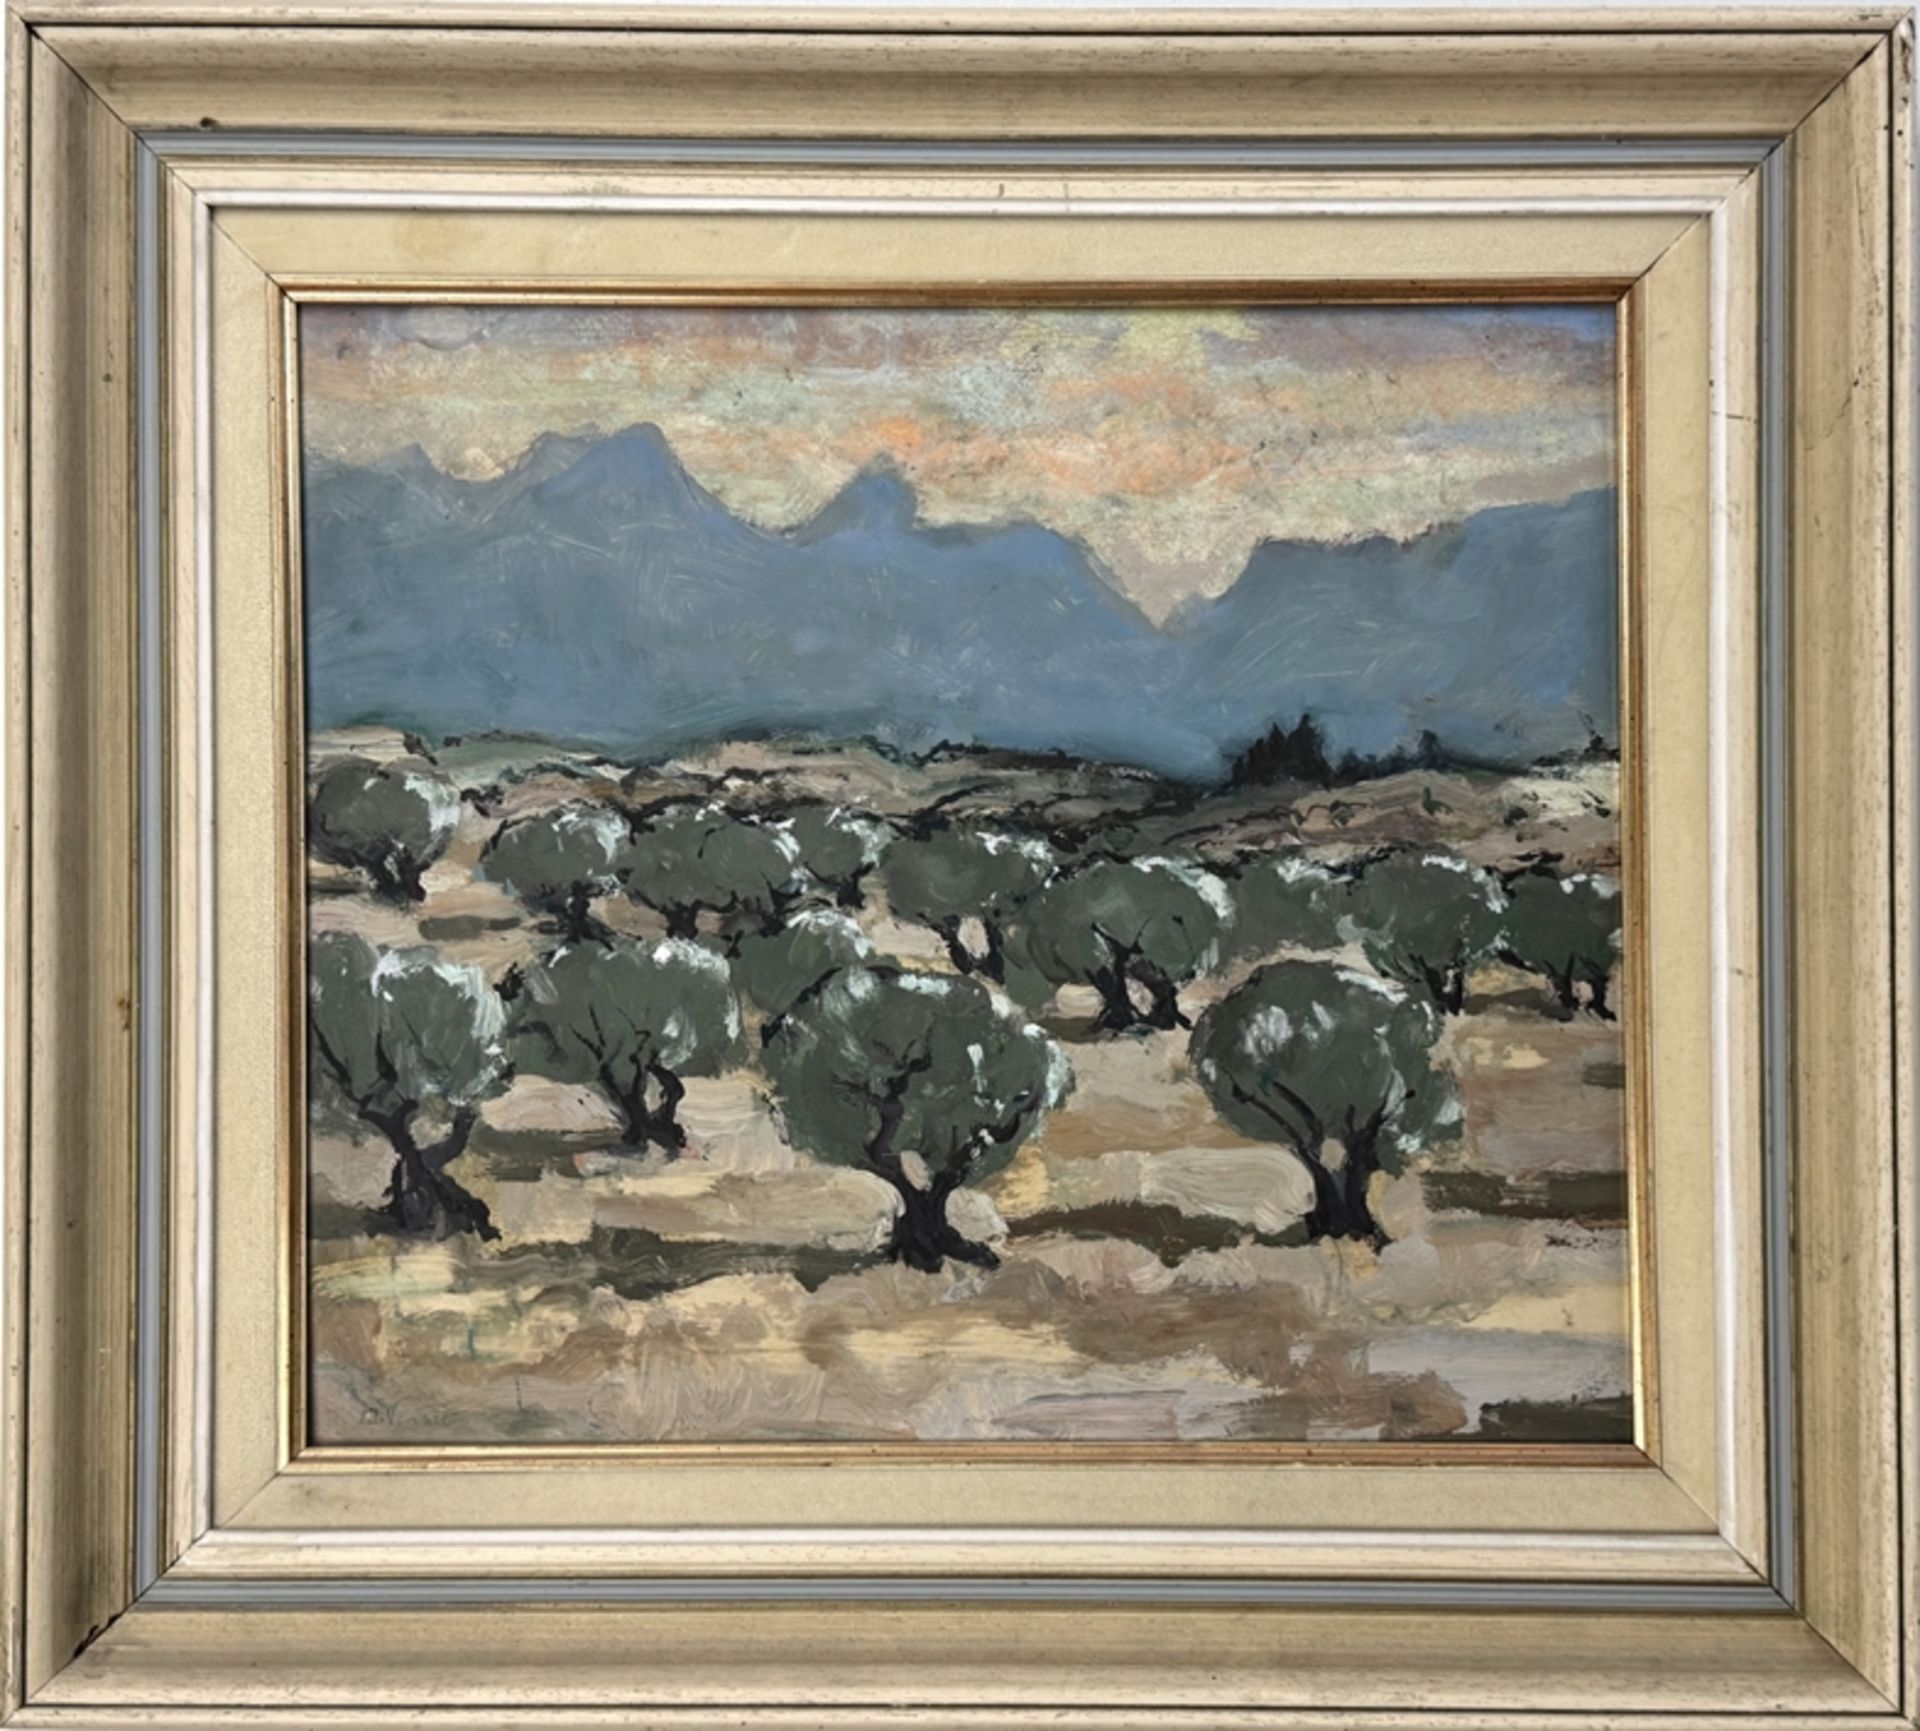 Artist (20th century) "Landscape view", in the foreground trees, in the background mountain view, o - Image 2 of 4